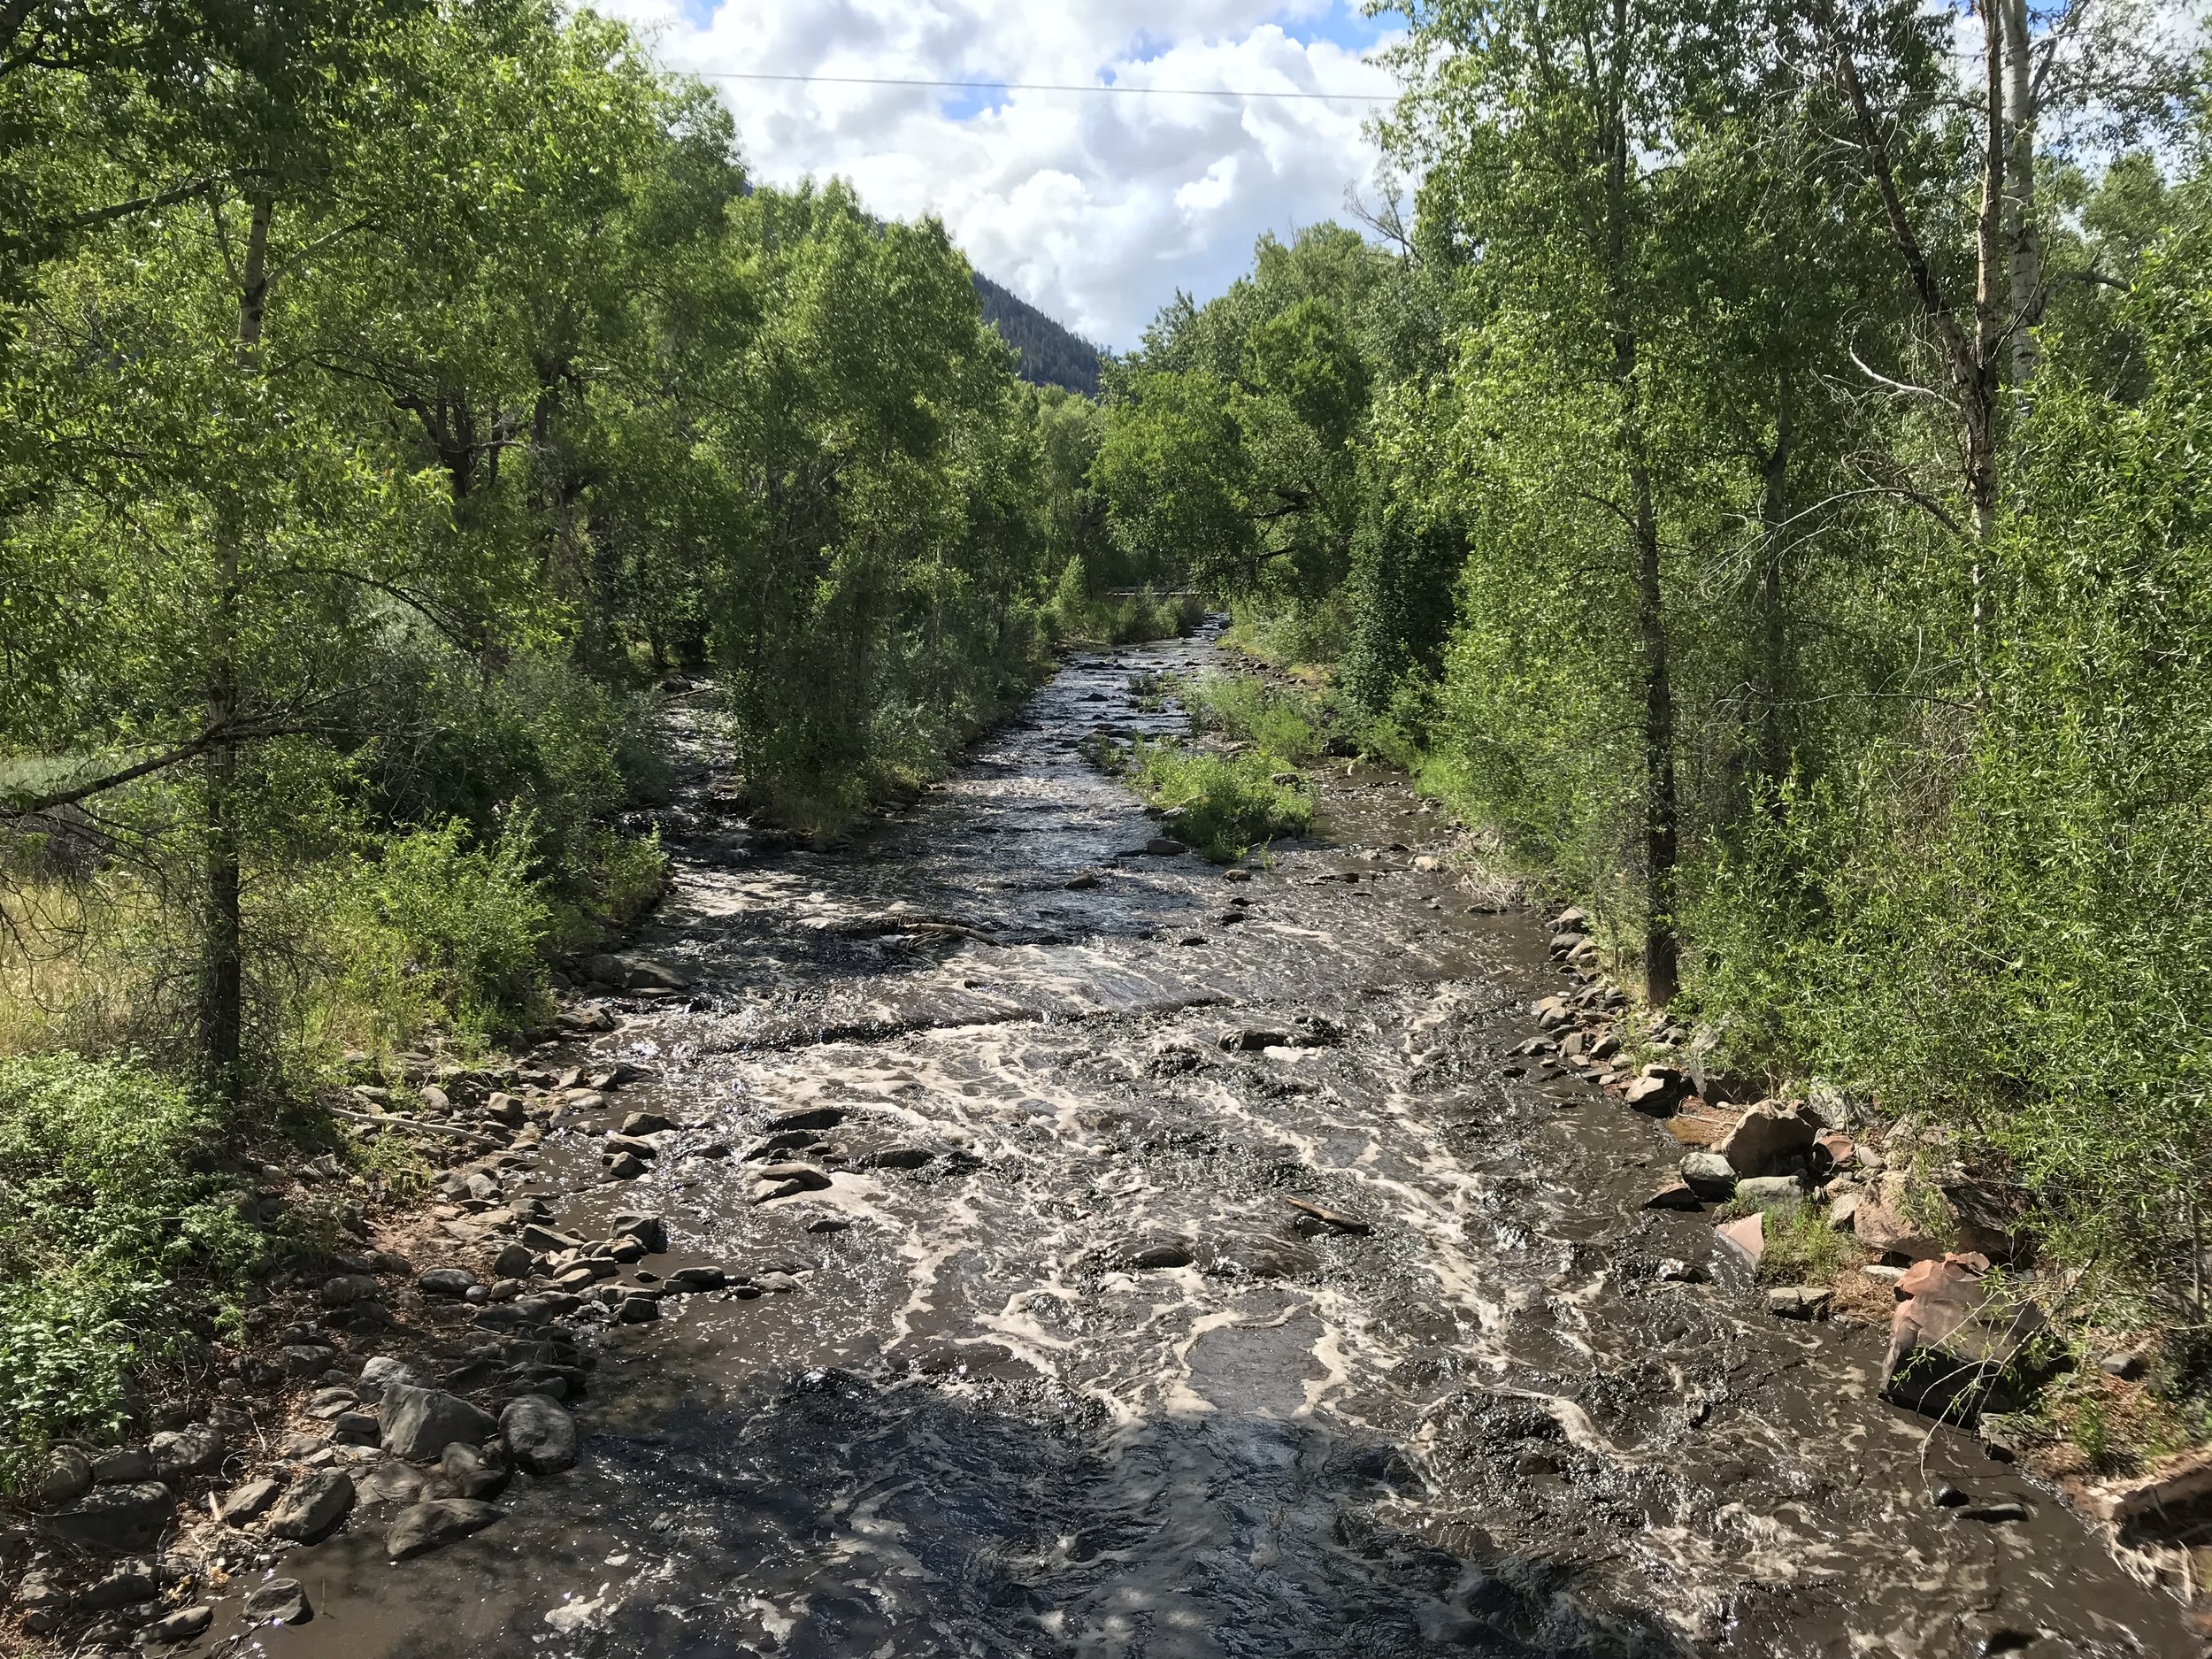 Hermosa Creek at Hwy 550 carried ash and sediment down from the fire scar after weekend rains (Sunday, June 17).